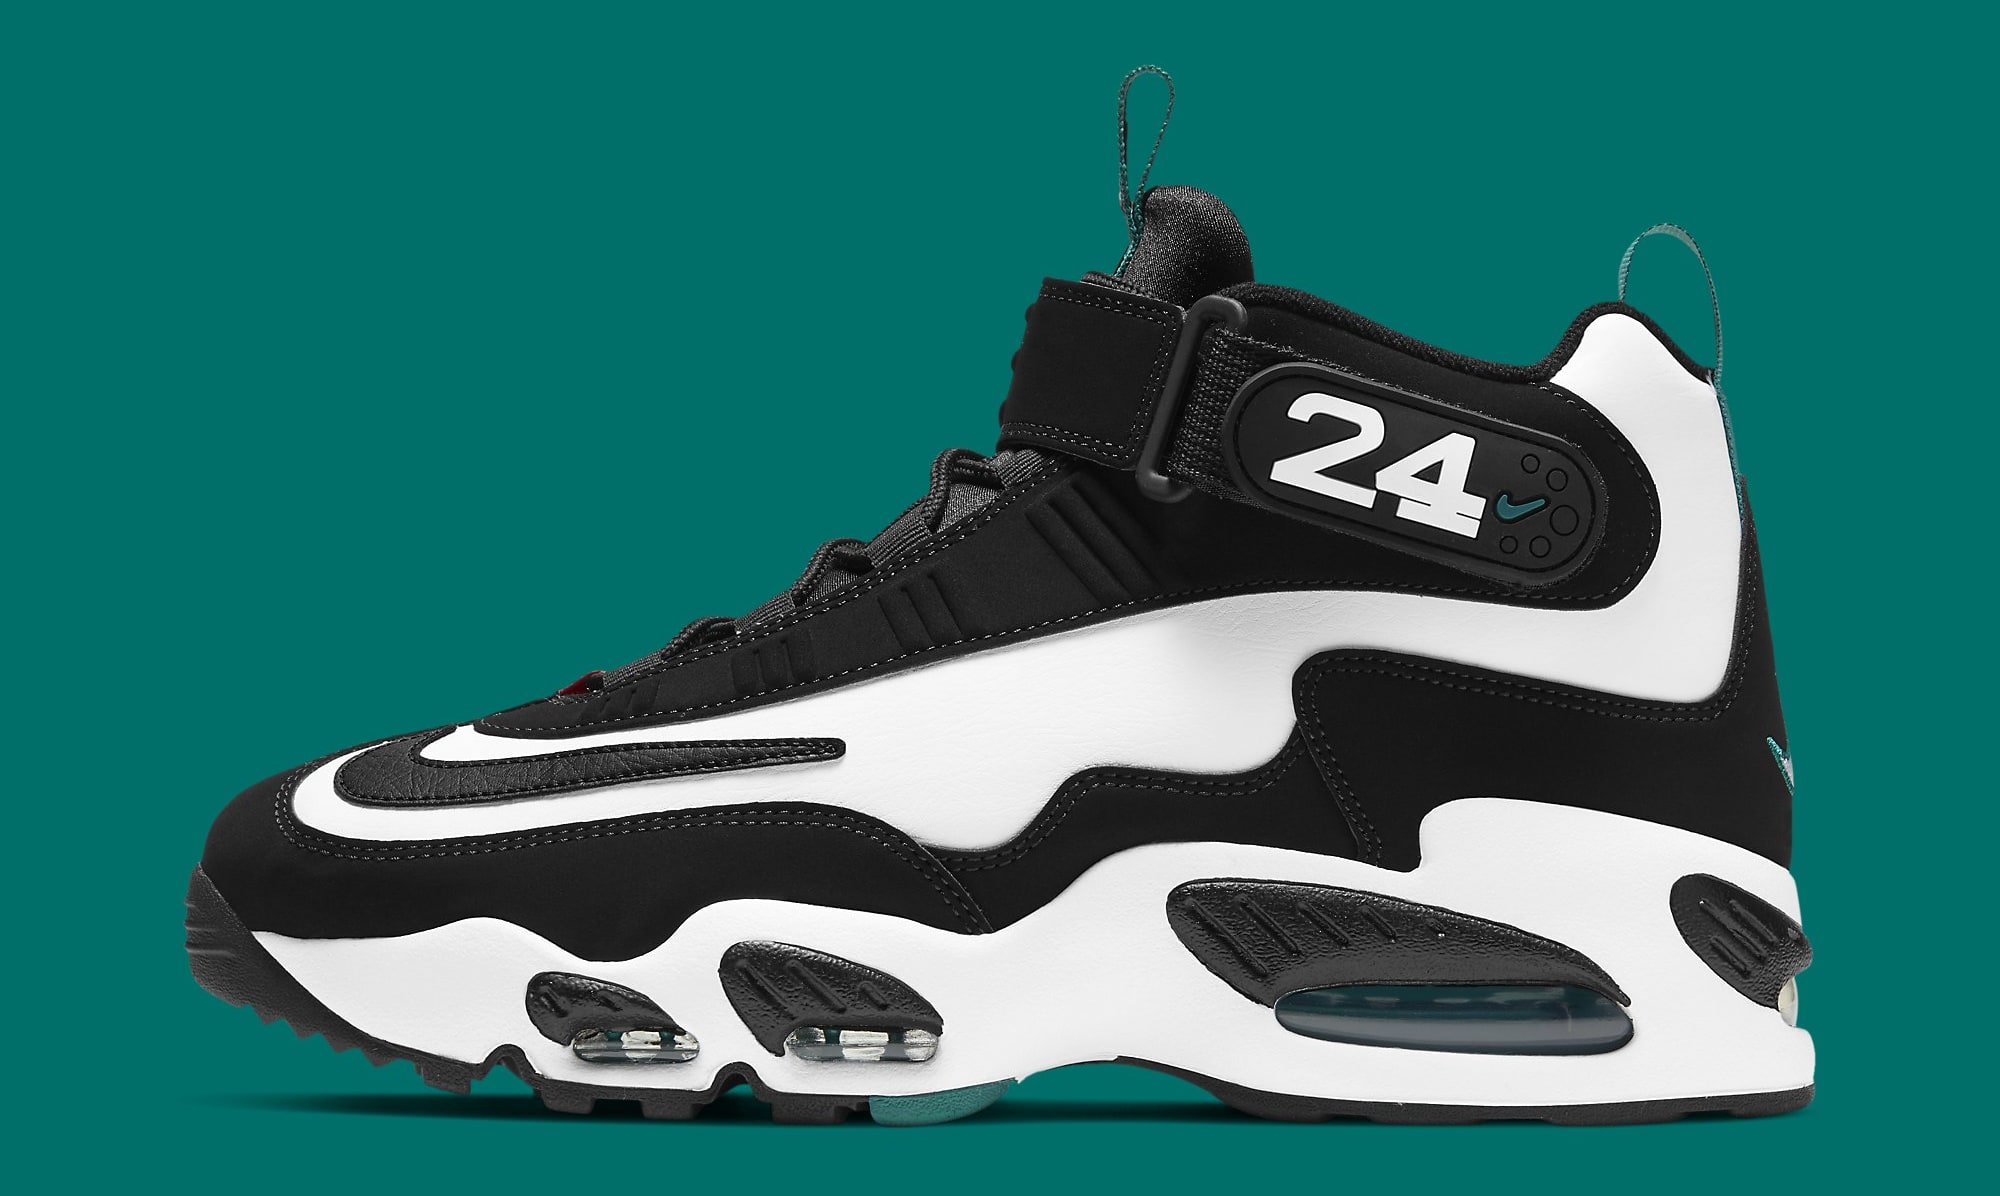 Detailed Look at the 2021 Nike Air Griffey Max 1 Retro | Complex